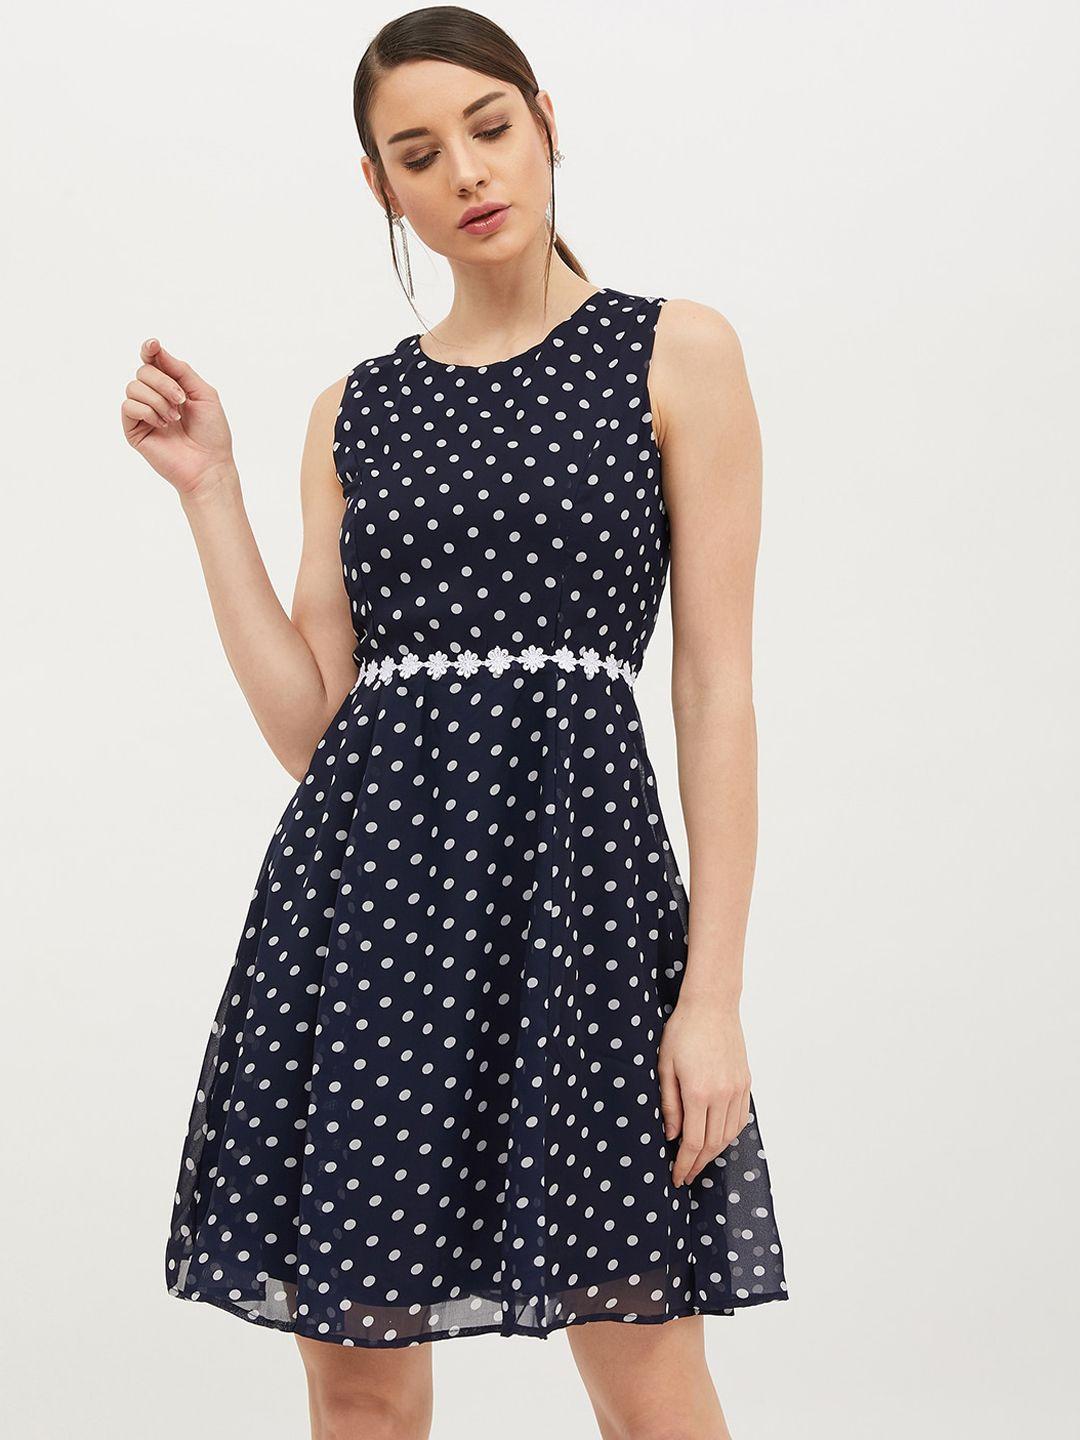 harpa women navy blue & white polka dots printed fit and flare dress